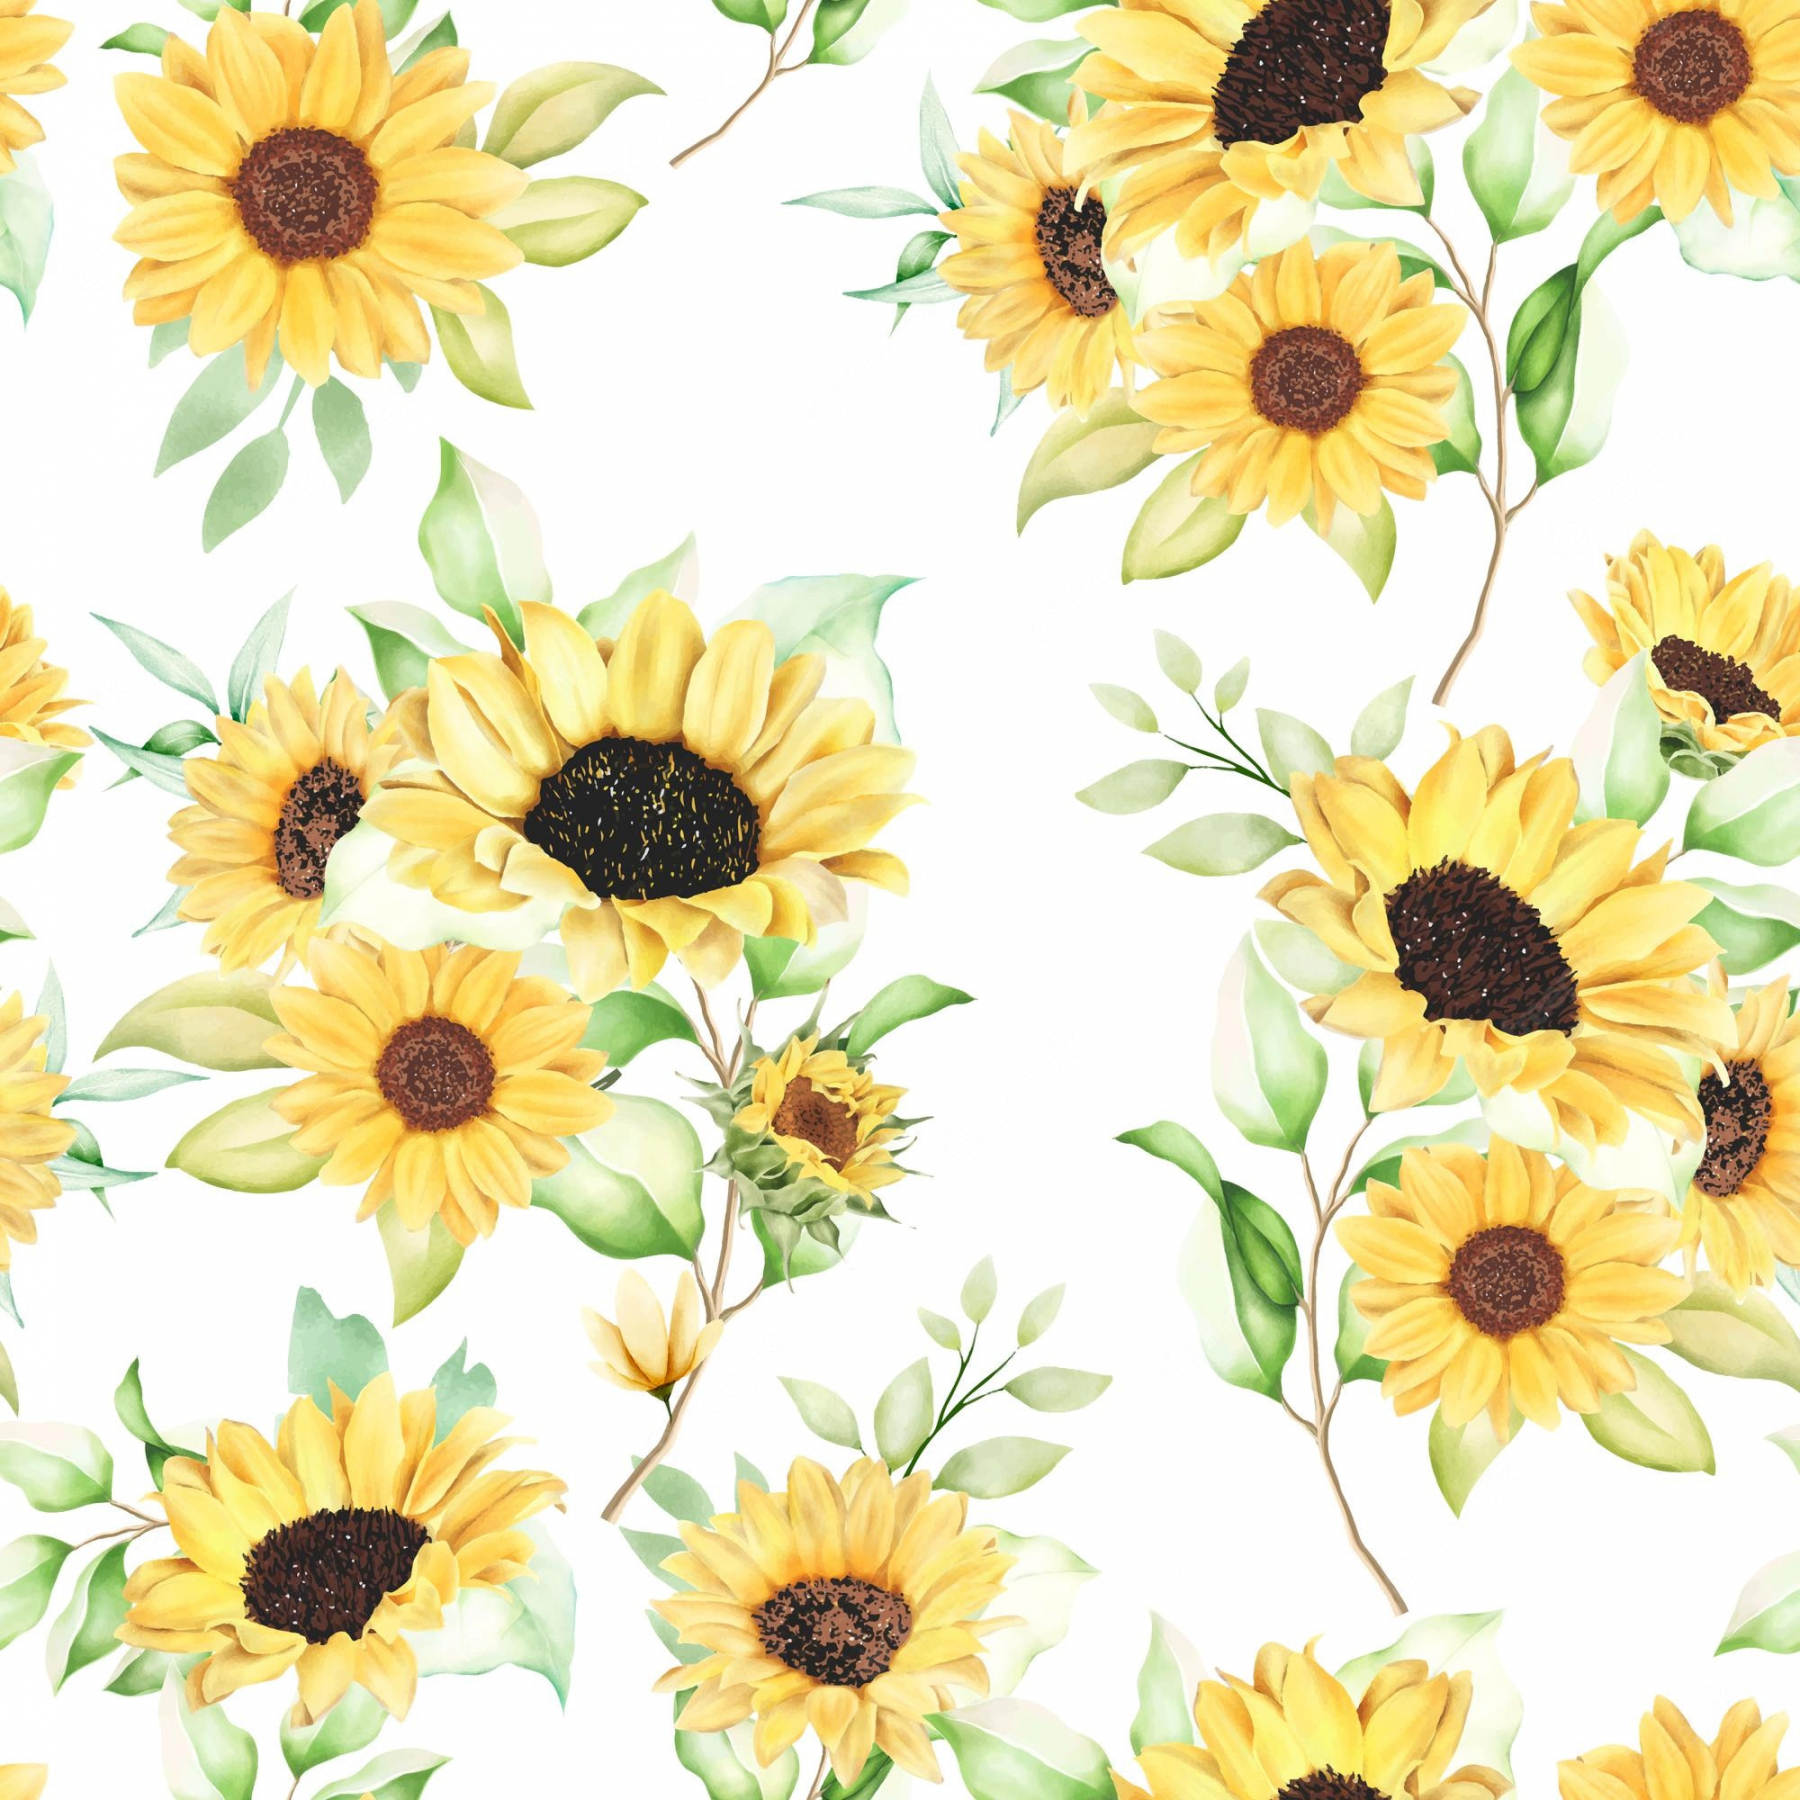 Sunflower Seamless Pattern Images - Free Download on Freepik - FREE Printables - Sunflower Pattern Free